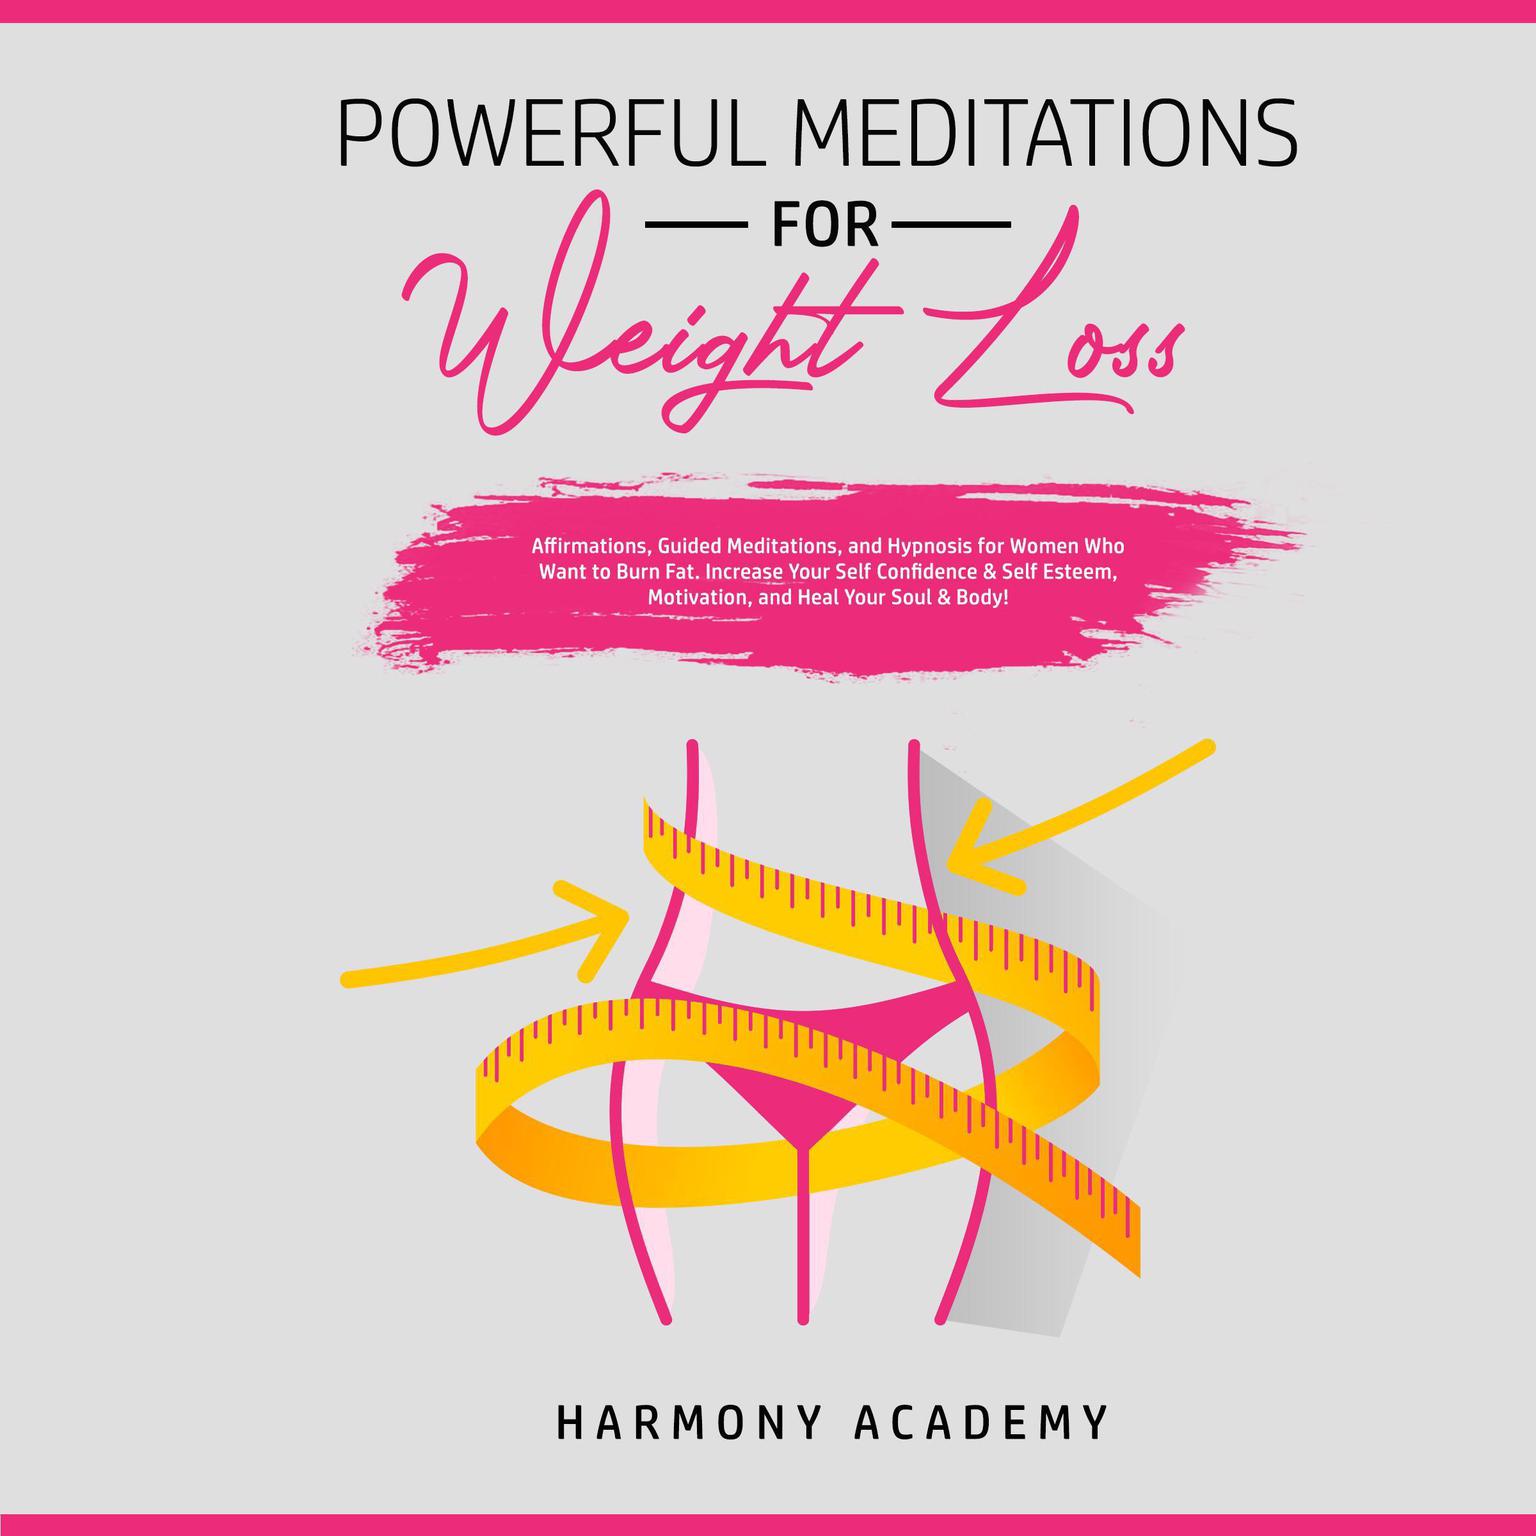 Powerful Meditations for Weight Loss: Affirmations, Guided Meditations, and Hypnosis for Women Who Want to Burn Fat. Increase Your Self Confidence & Self Esteem, Motivation, and Heal Your Soul & Body! Audiobook, by Harmony Academy